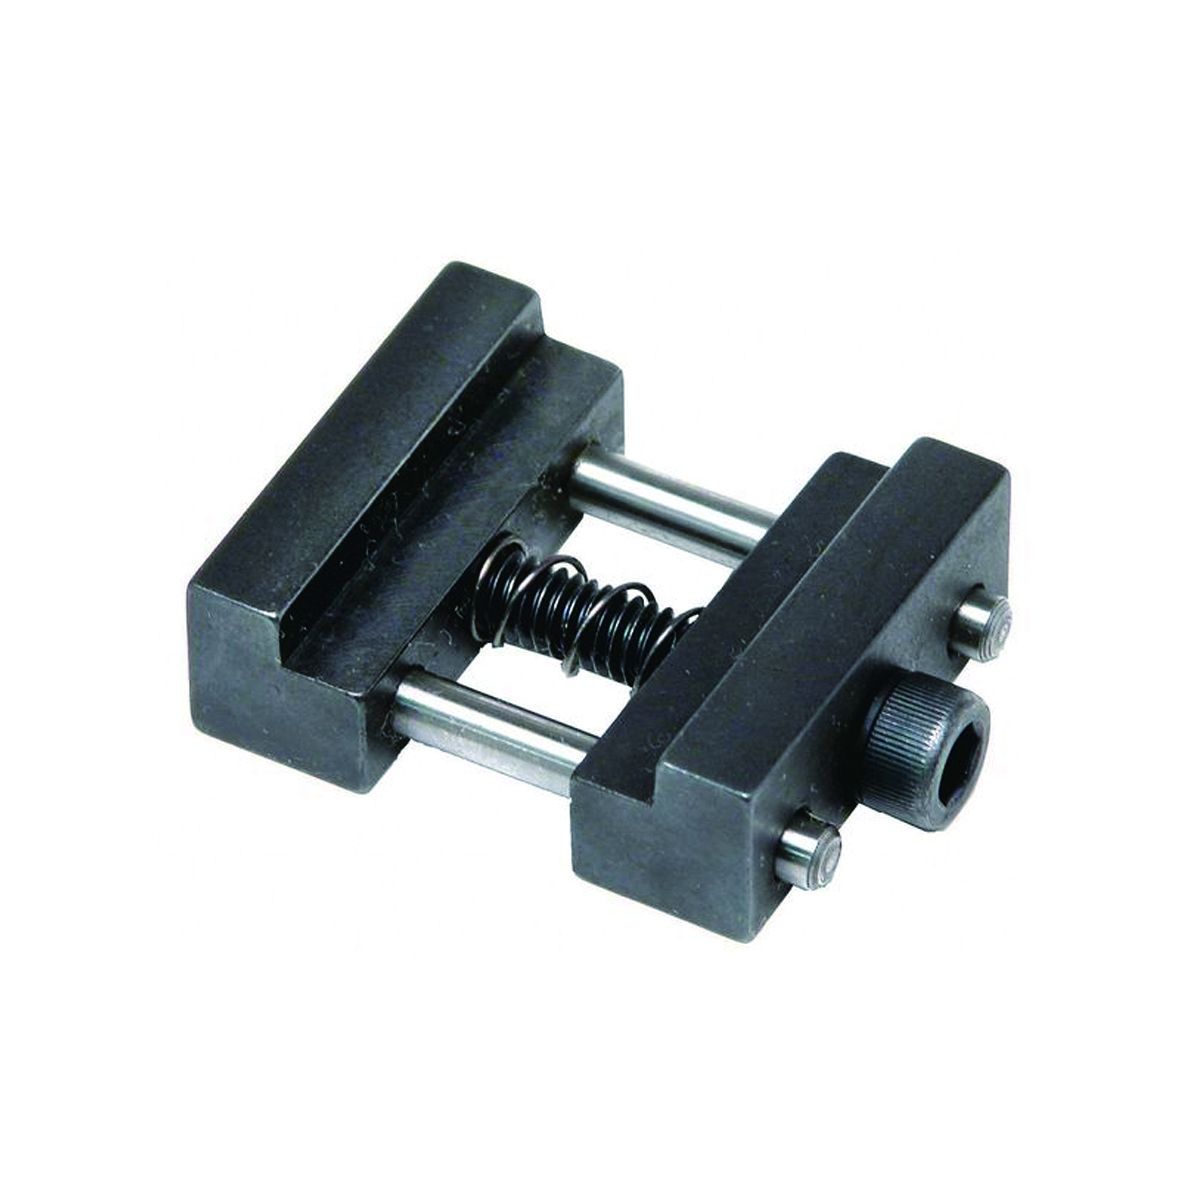 QUICK CLAMP VISE WORK STOP - FITS 3/8-3/4" JAWS (3906-2131)